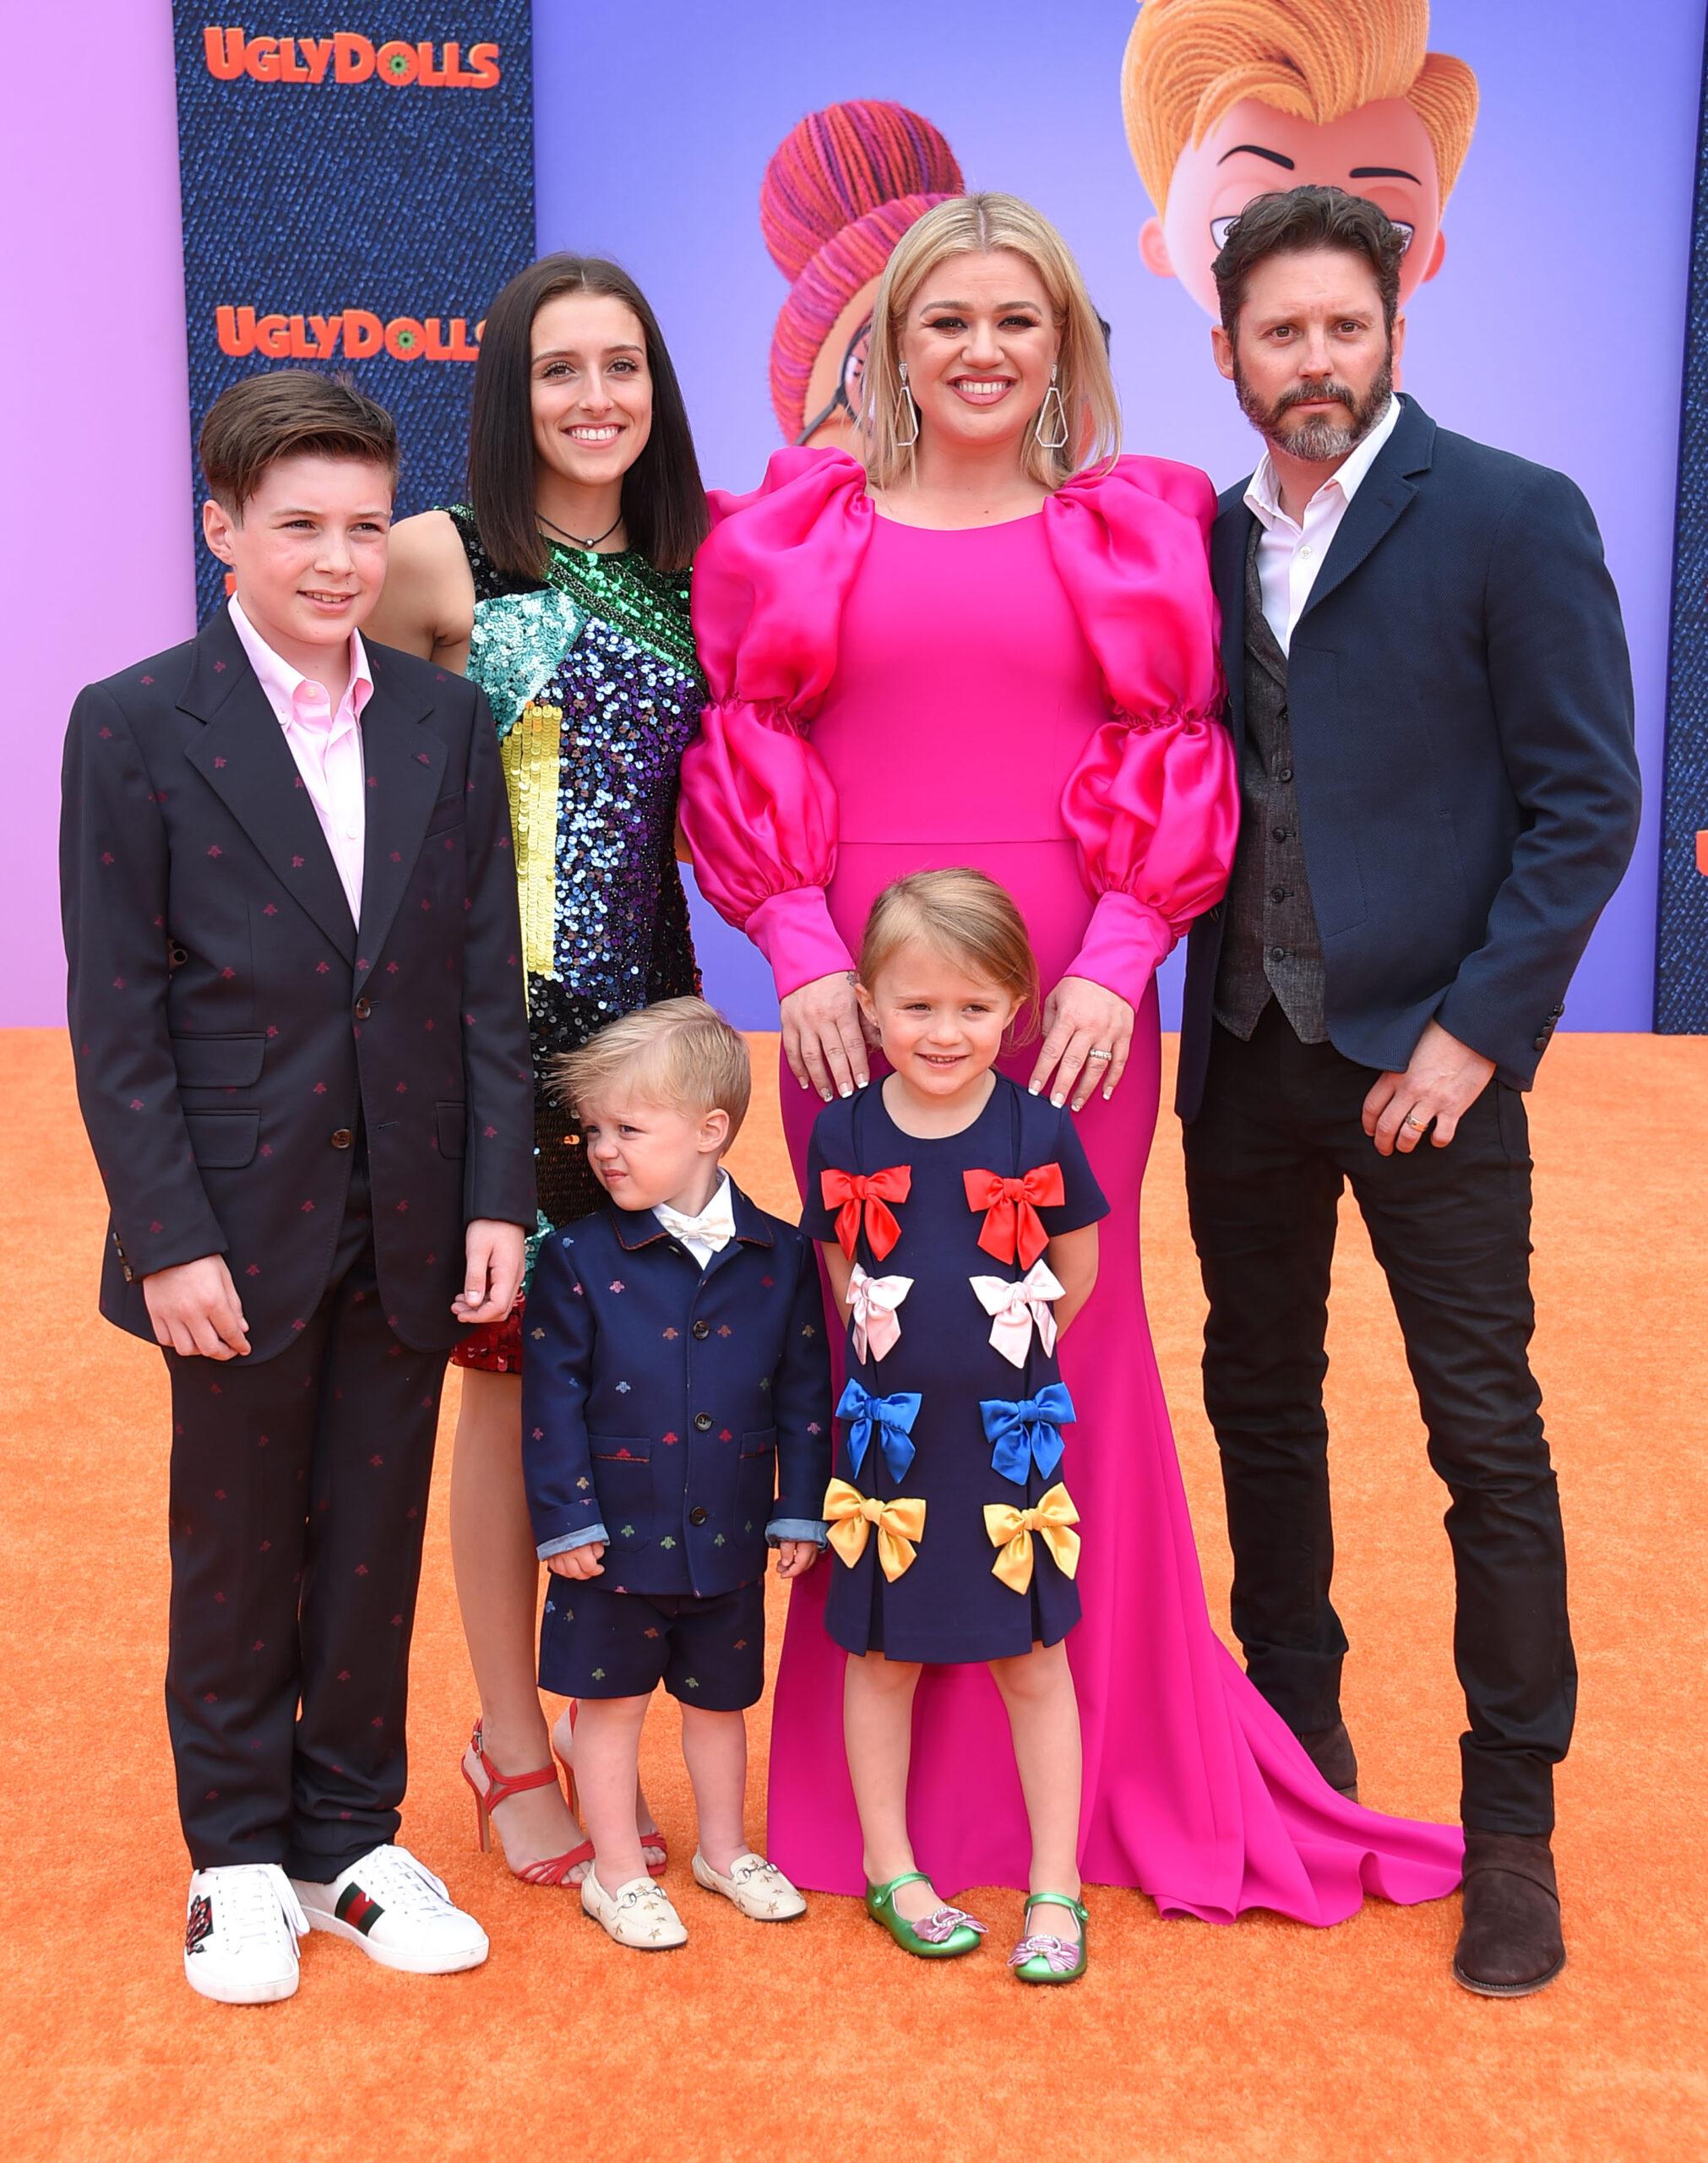 Kelly Clarkson and ex-husband Brandon Blackstock with their blended family